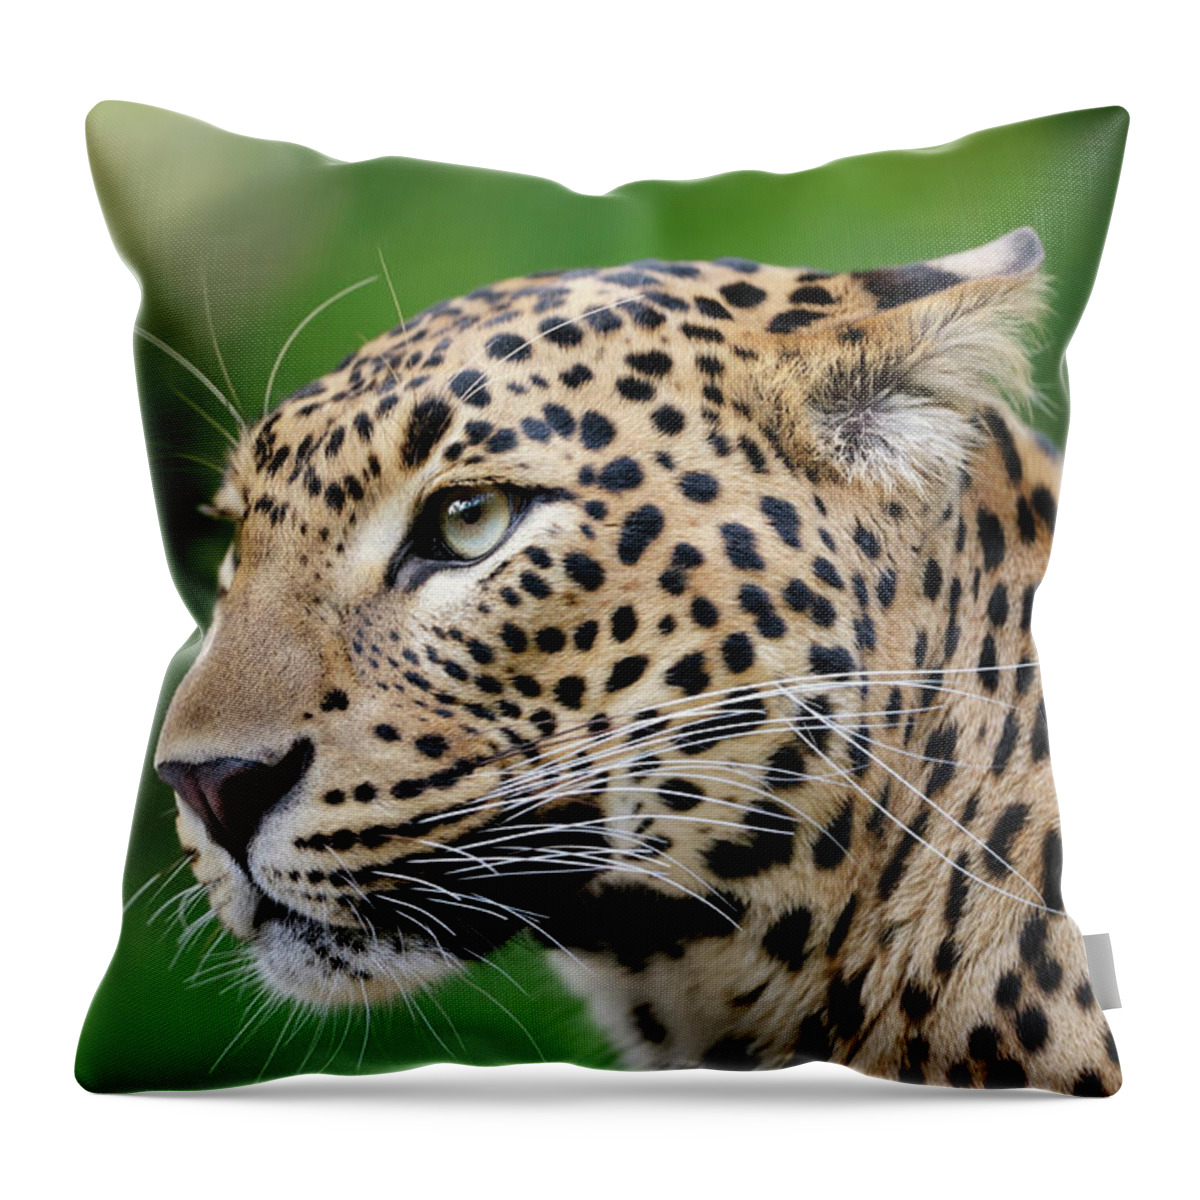 Big Cat Throw Pillow featuring the photograph Leopard by Freder